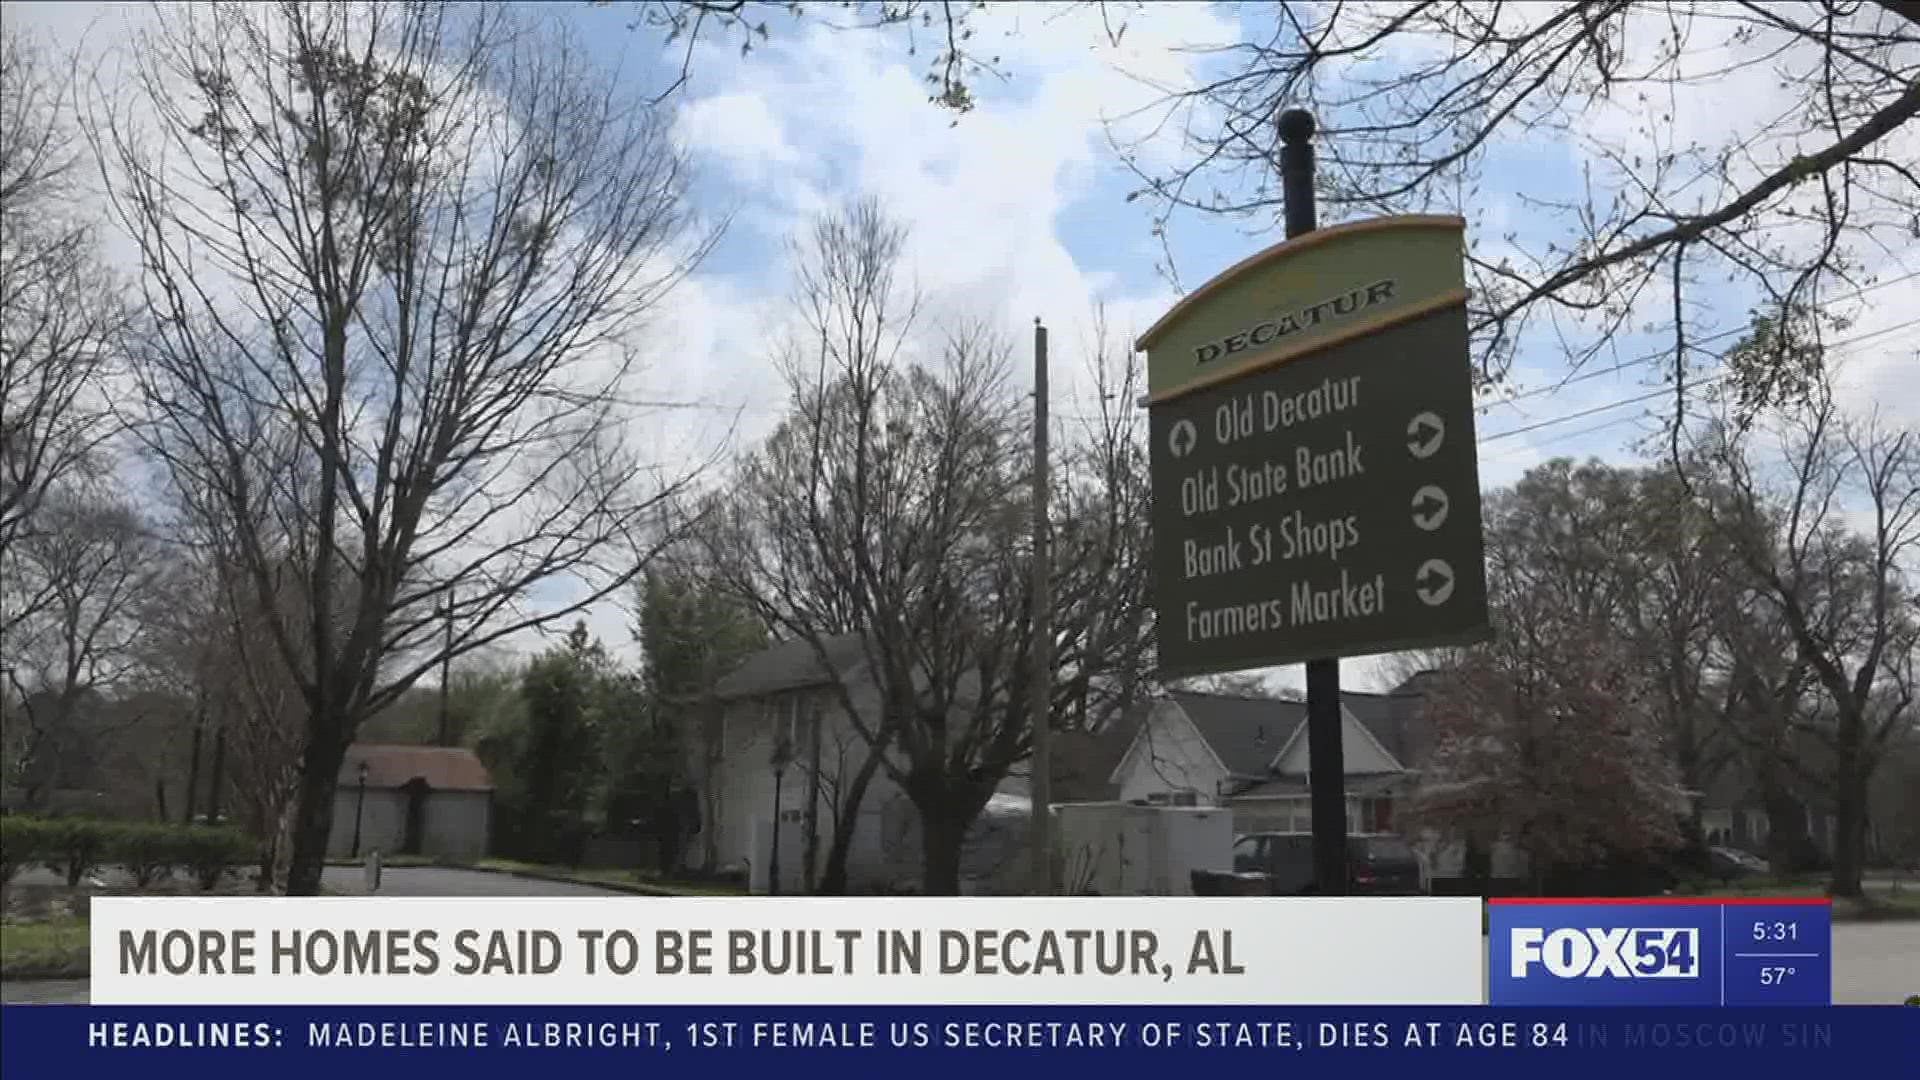 Decatur growth means changes to development and an increased need for housing.